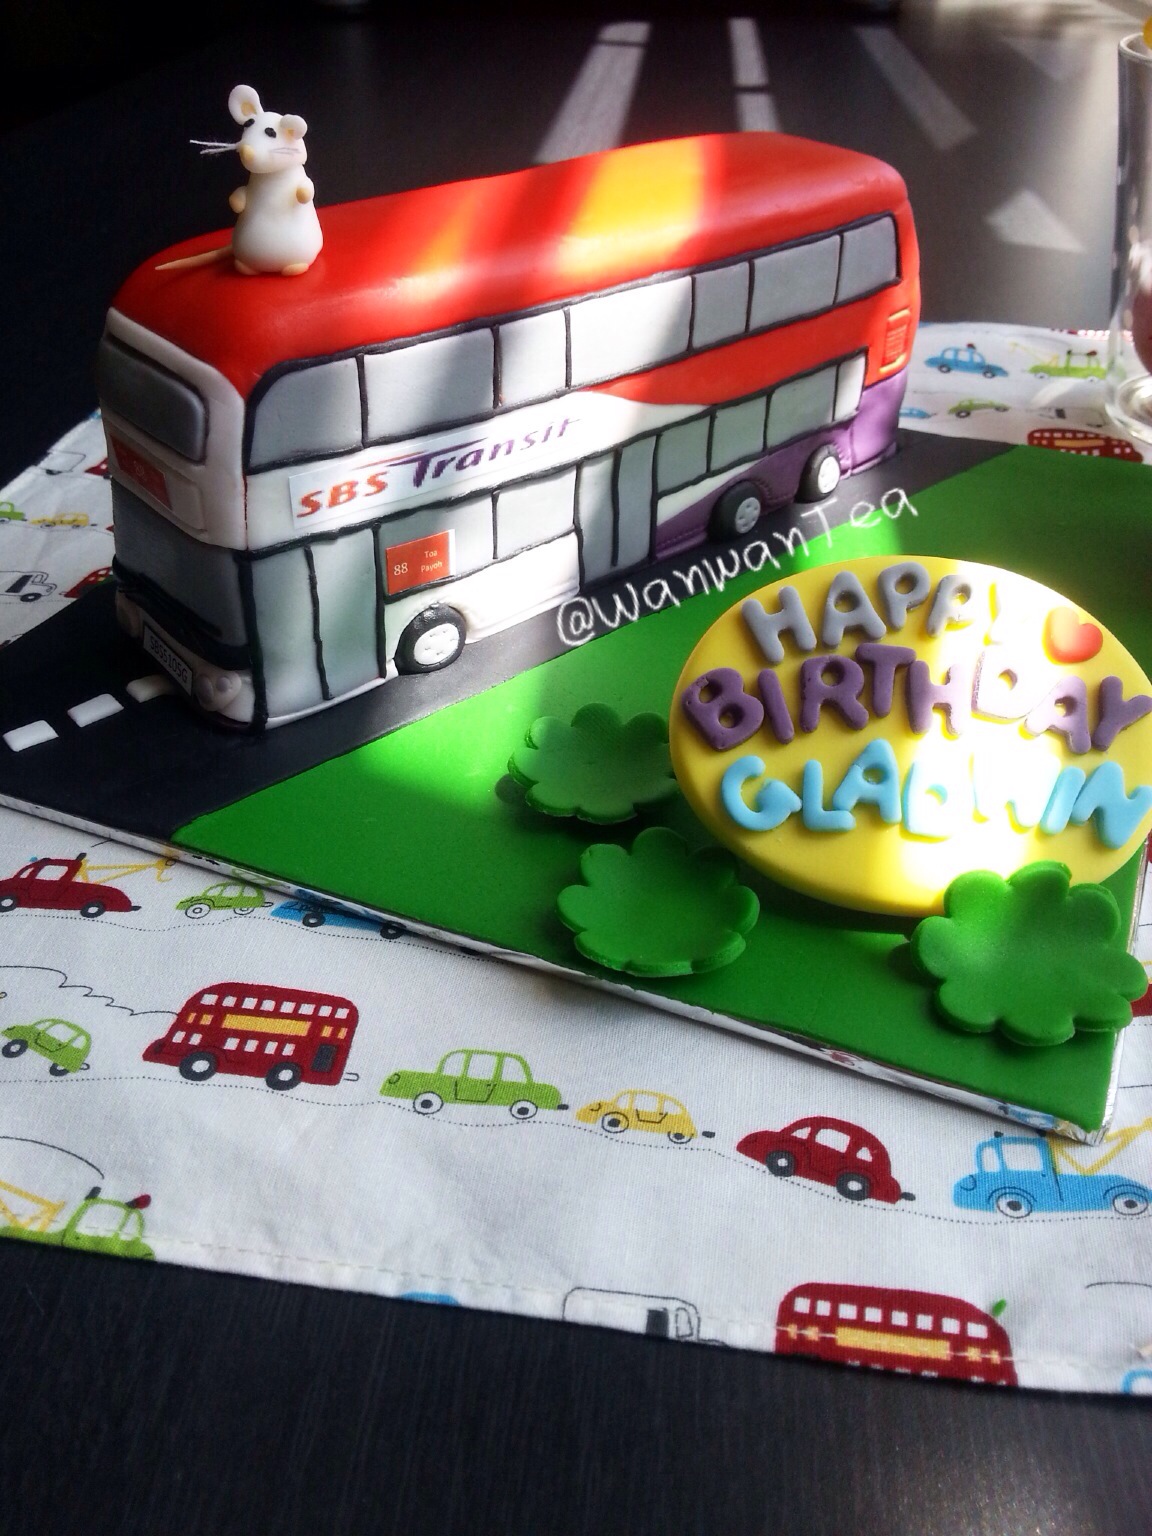 Celebrate with Cake!: 3D sculpted Tayo Bus Cake